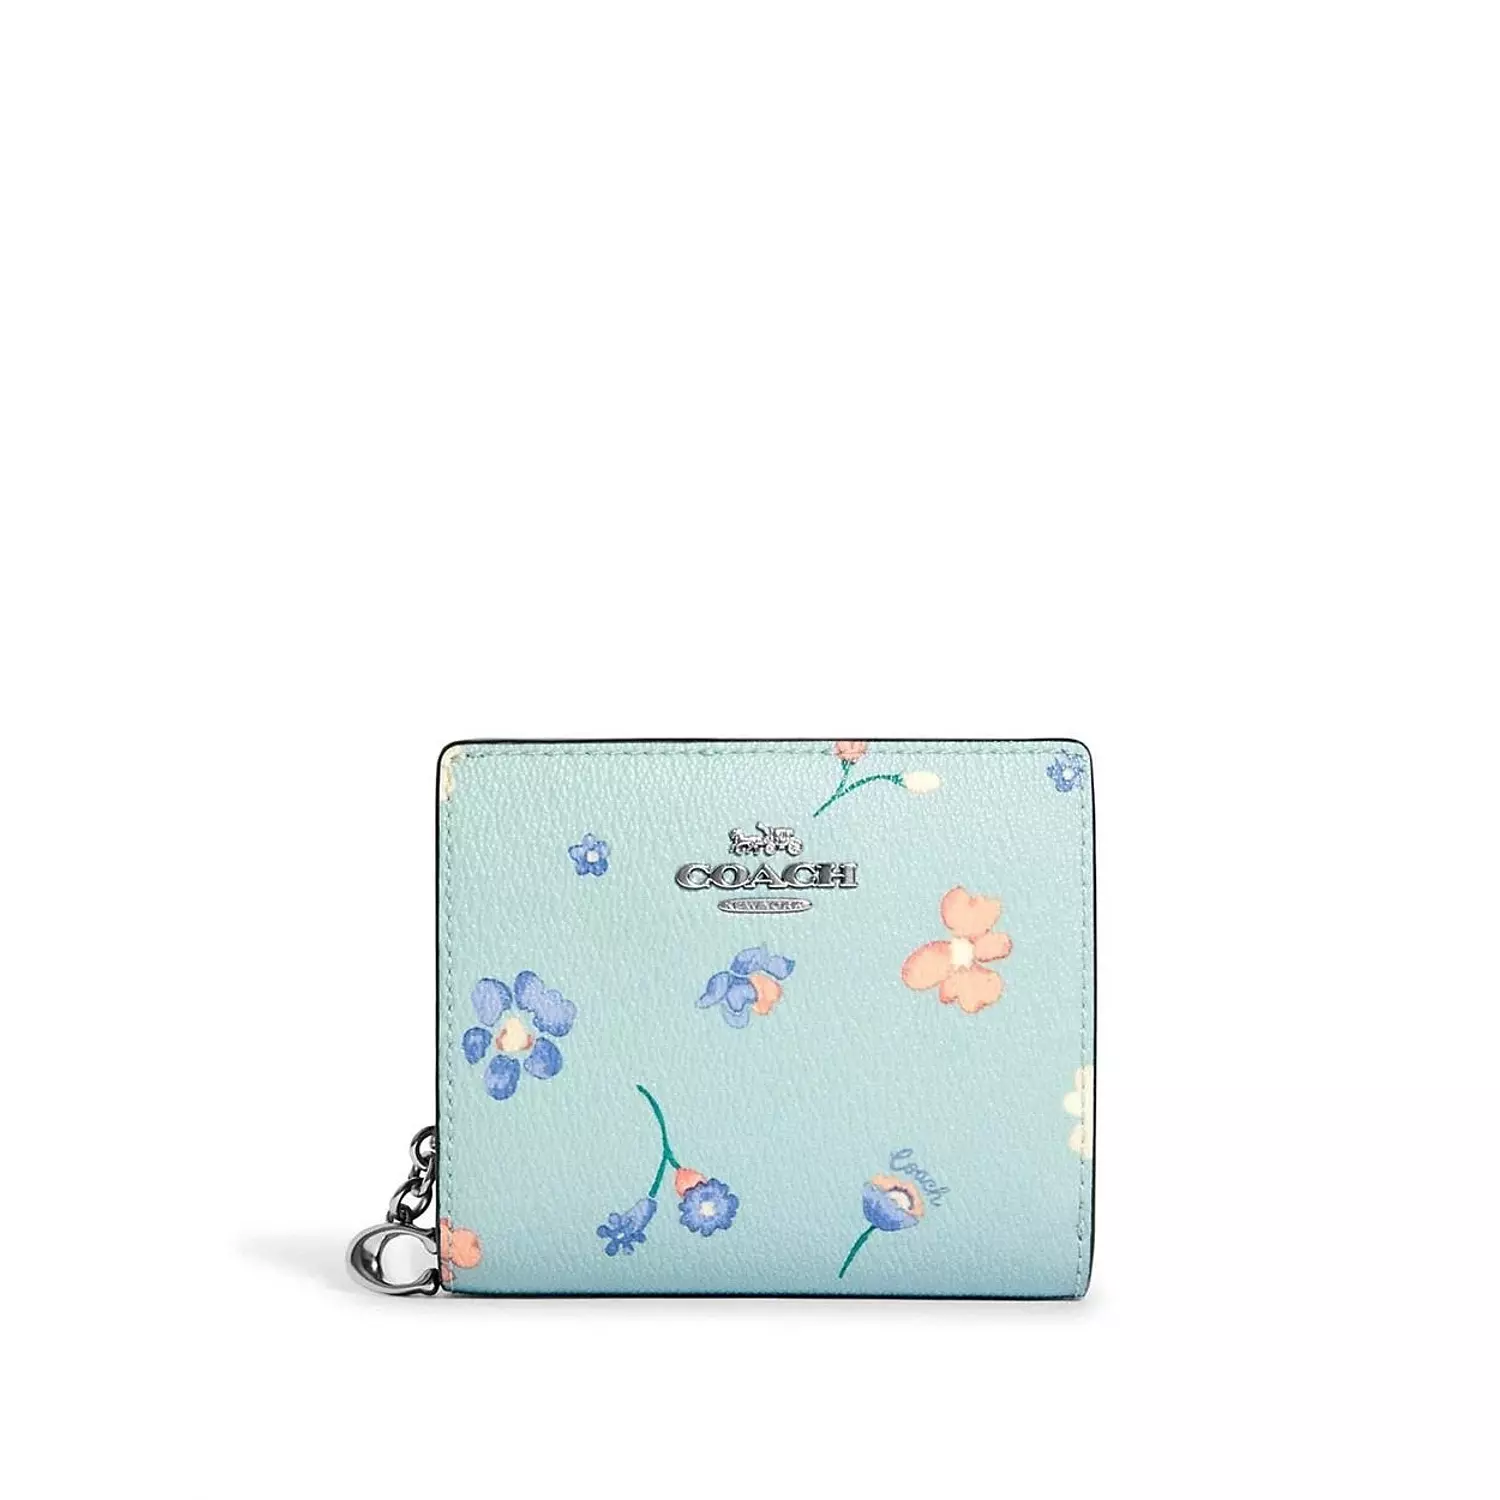 Coach Snap Wallet in Mystical Floral Print hover image